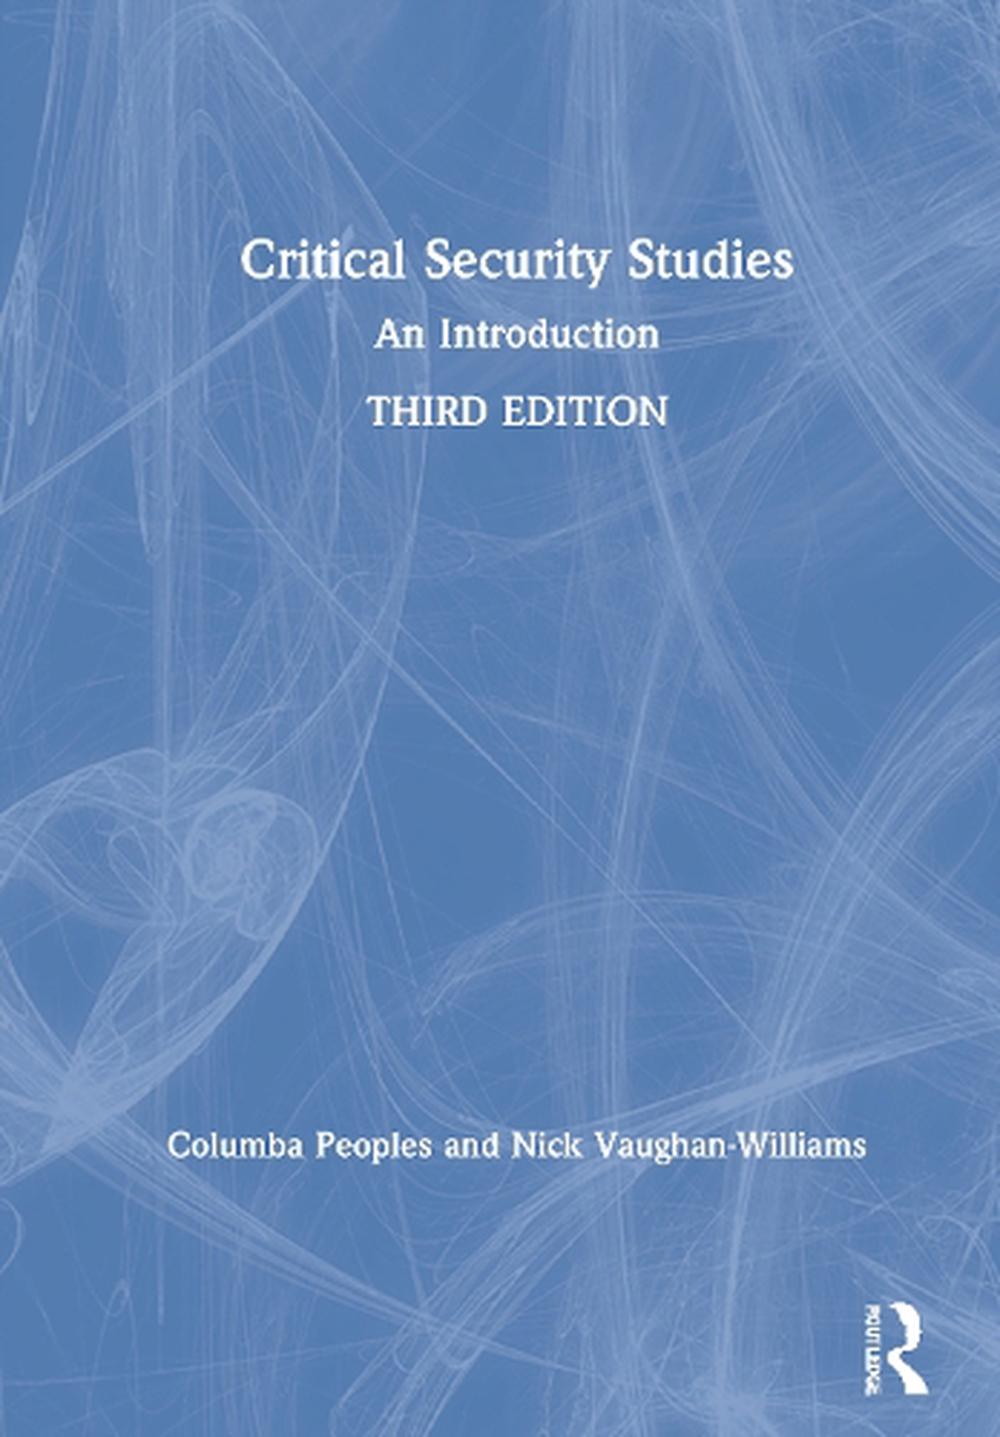 Critical Security Studies An Introduction by Columba Peoples (English